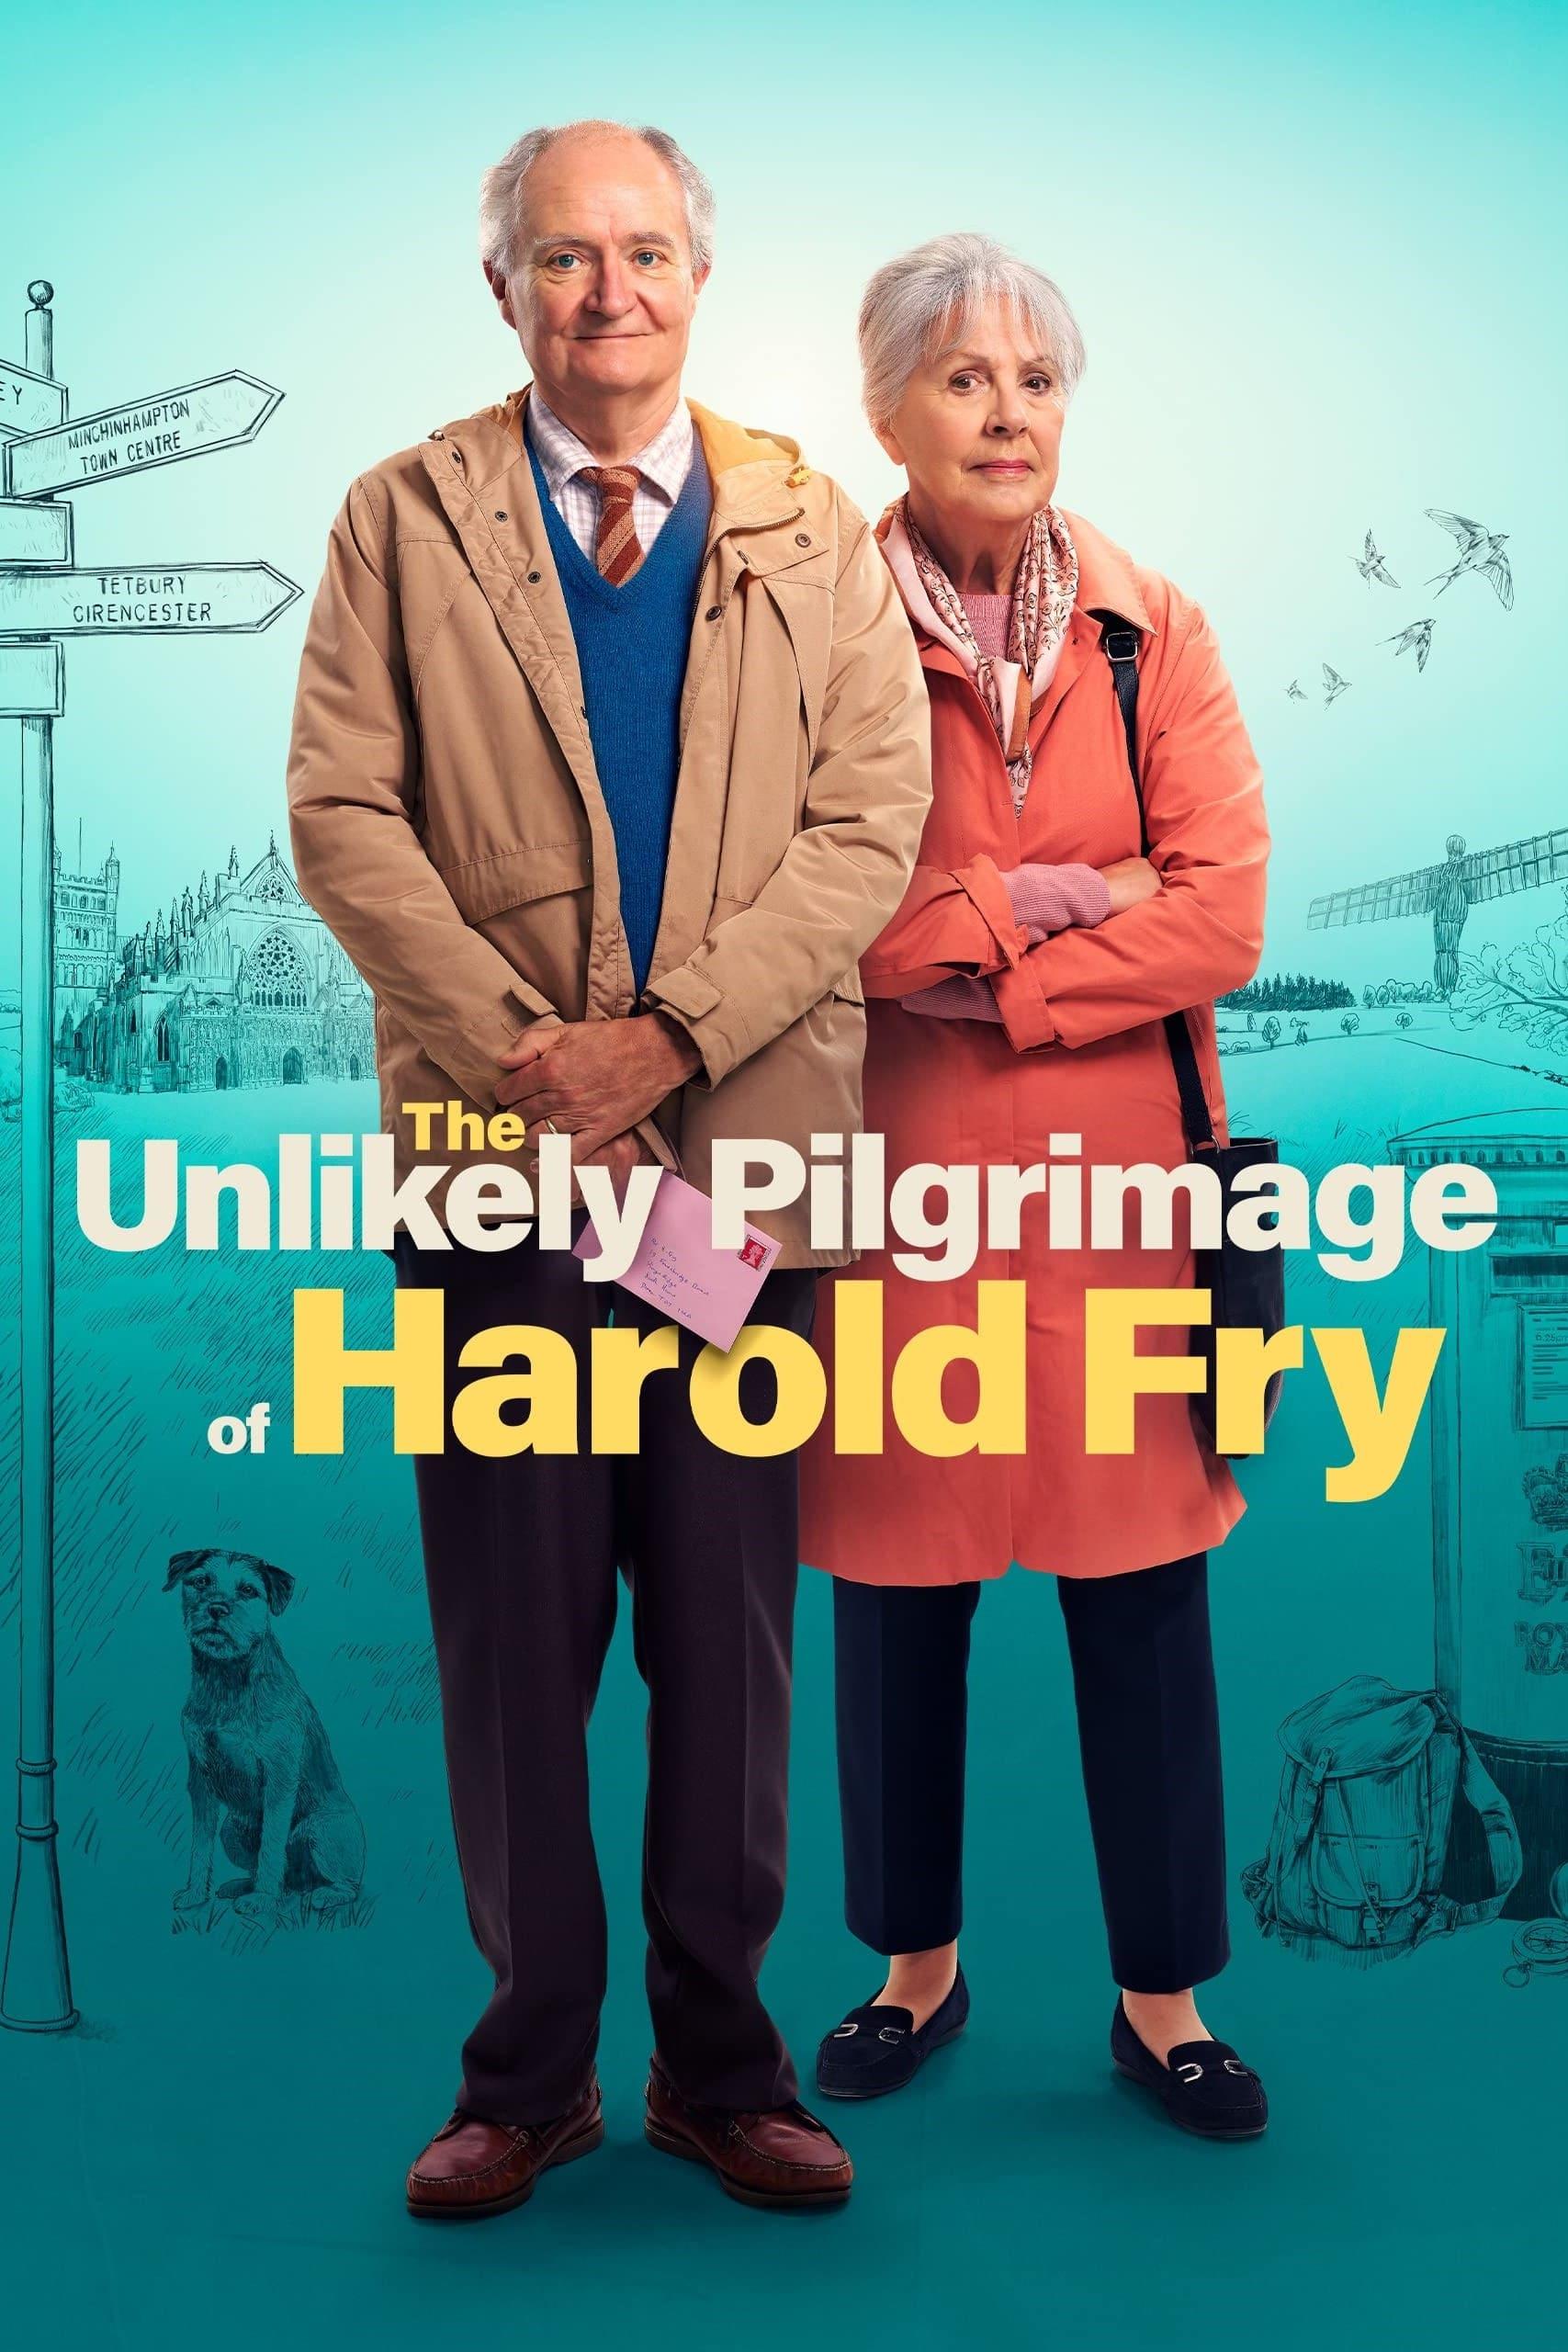 The Unlikely Pilgrimage of Harold Fry poster